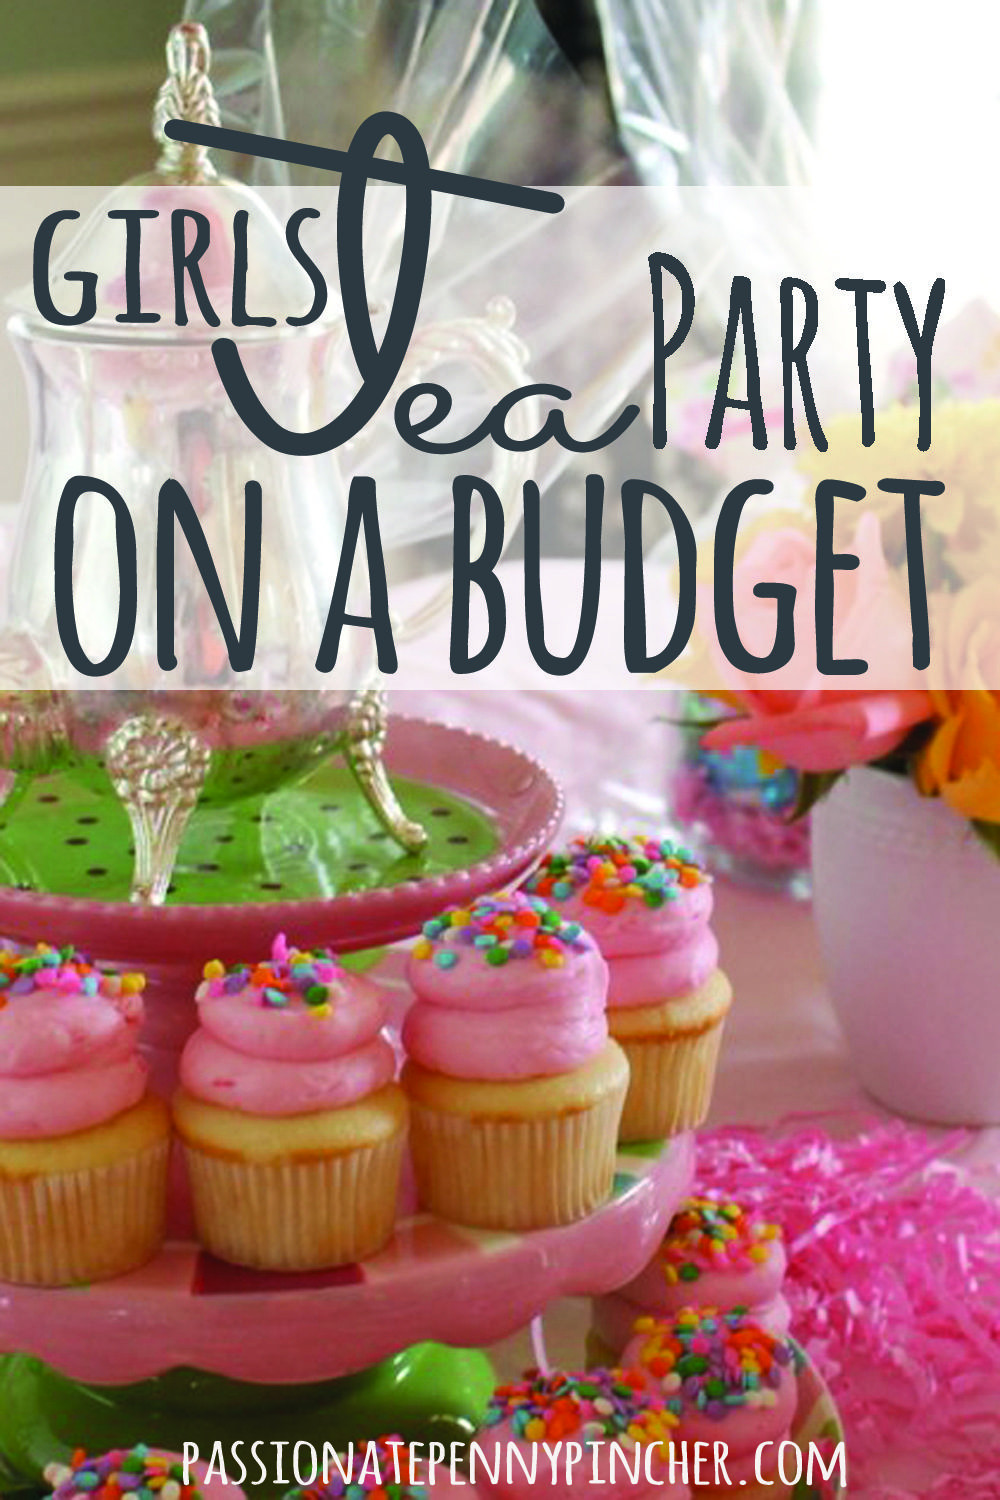 Tea Party Food Ideas For Toddlers
 Girls Tea Party A Bud